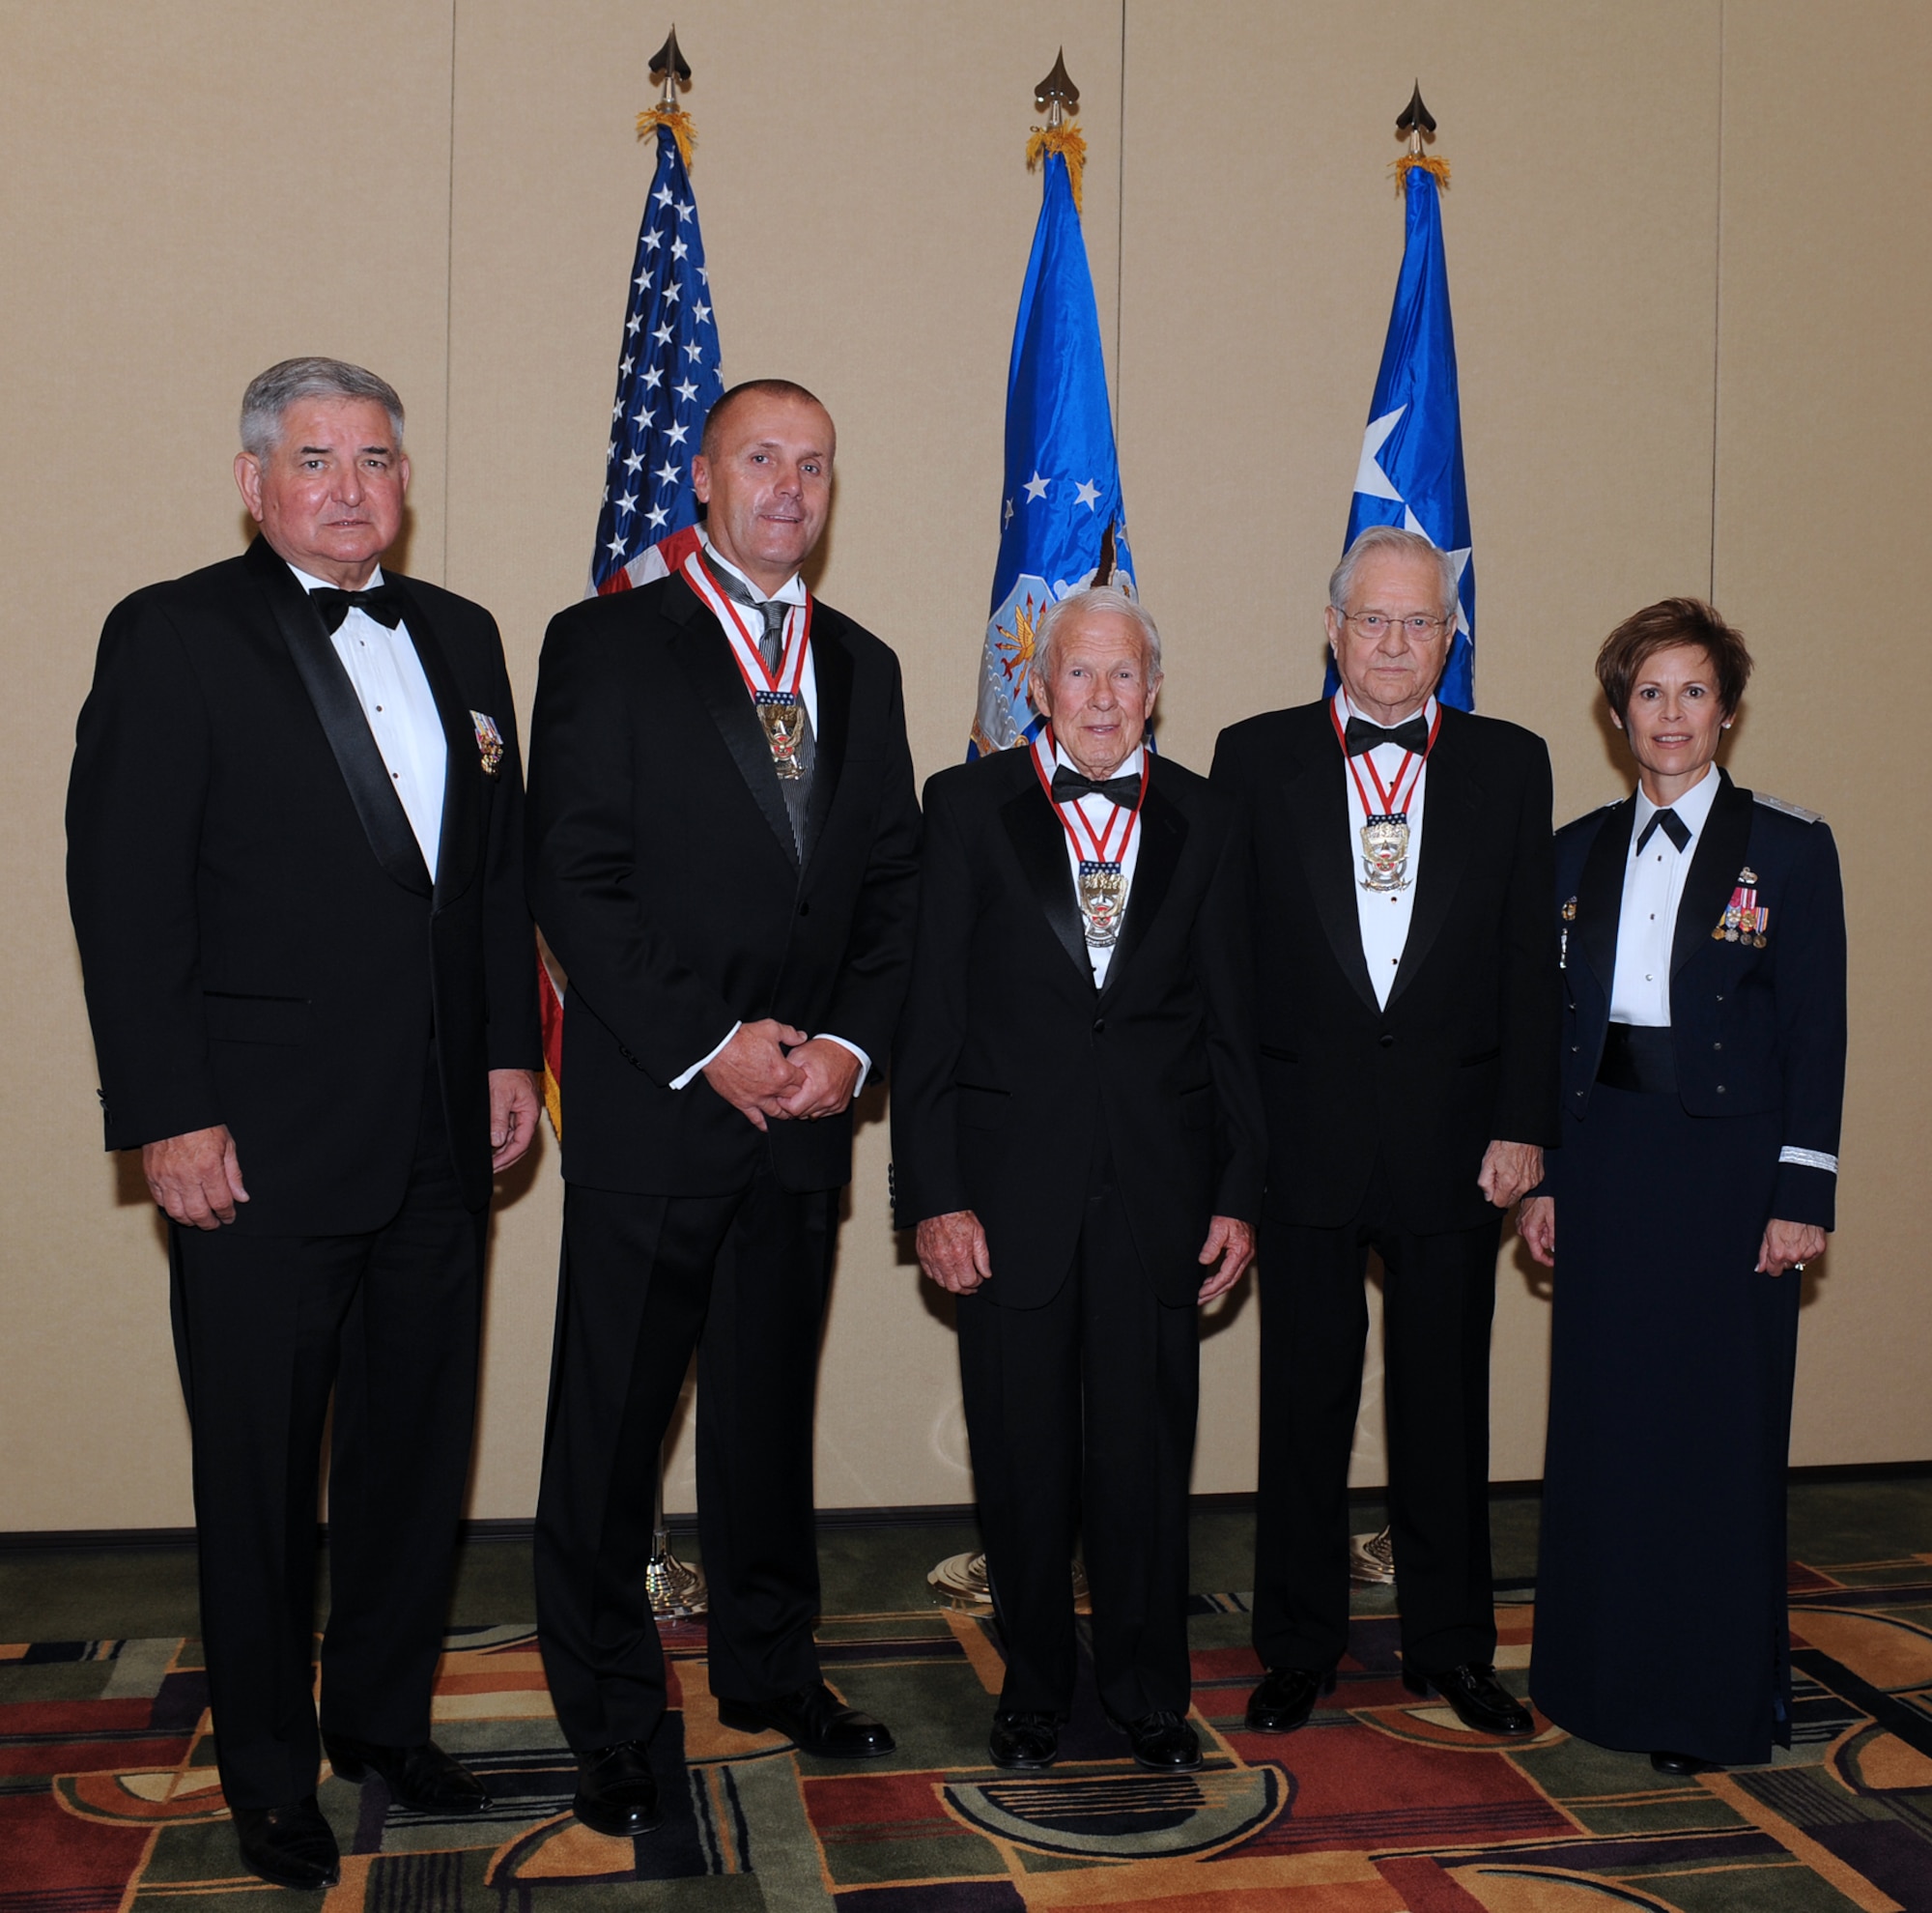 (From left to right) Ret. Gen. Ronald Fogleman, former Air Force chief of staff, Mike Hendry, Hal "Doc" Marsell, Jack Price and Maj. Gen. Kathleen Close, Ogden Air Logistics Center commander. (U.S. Air Force Photo by Alex R. Lloyd)